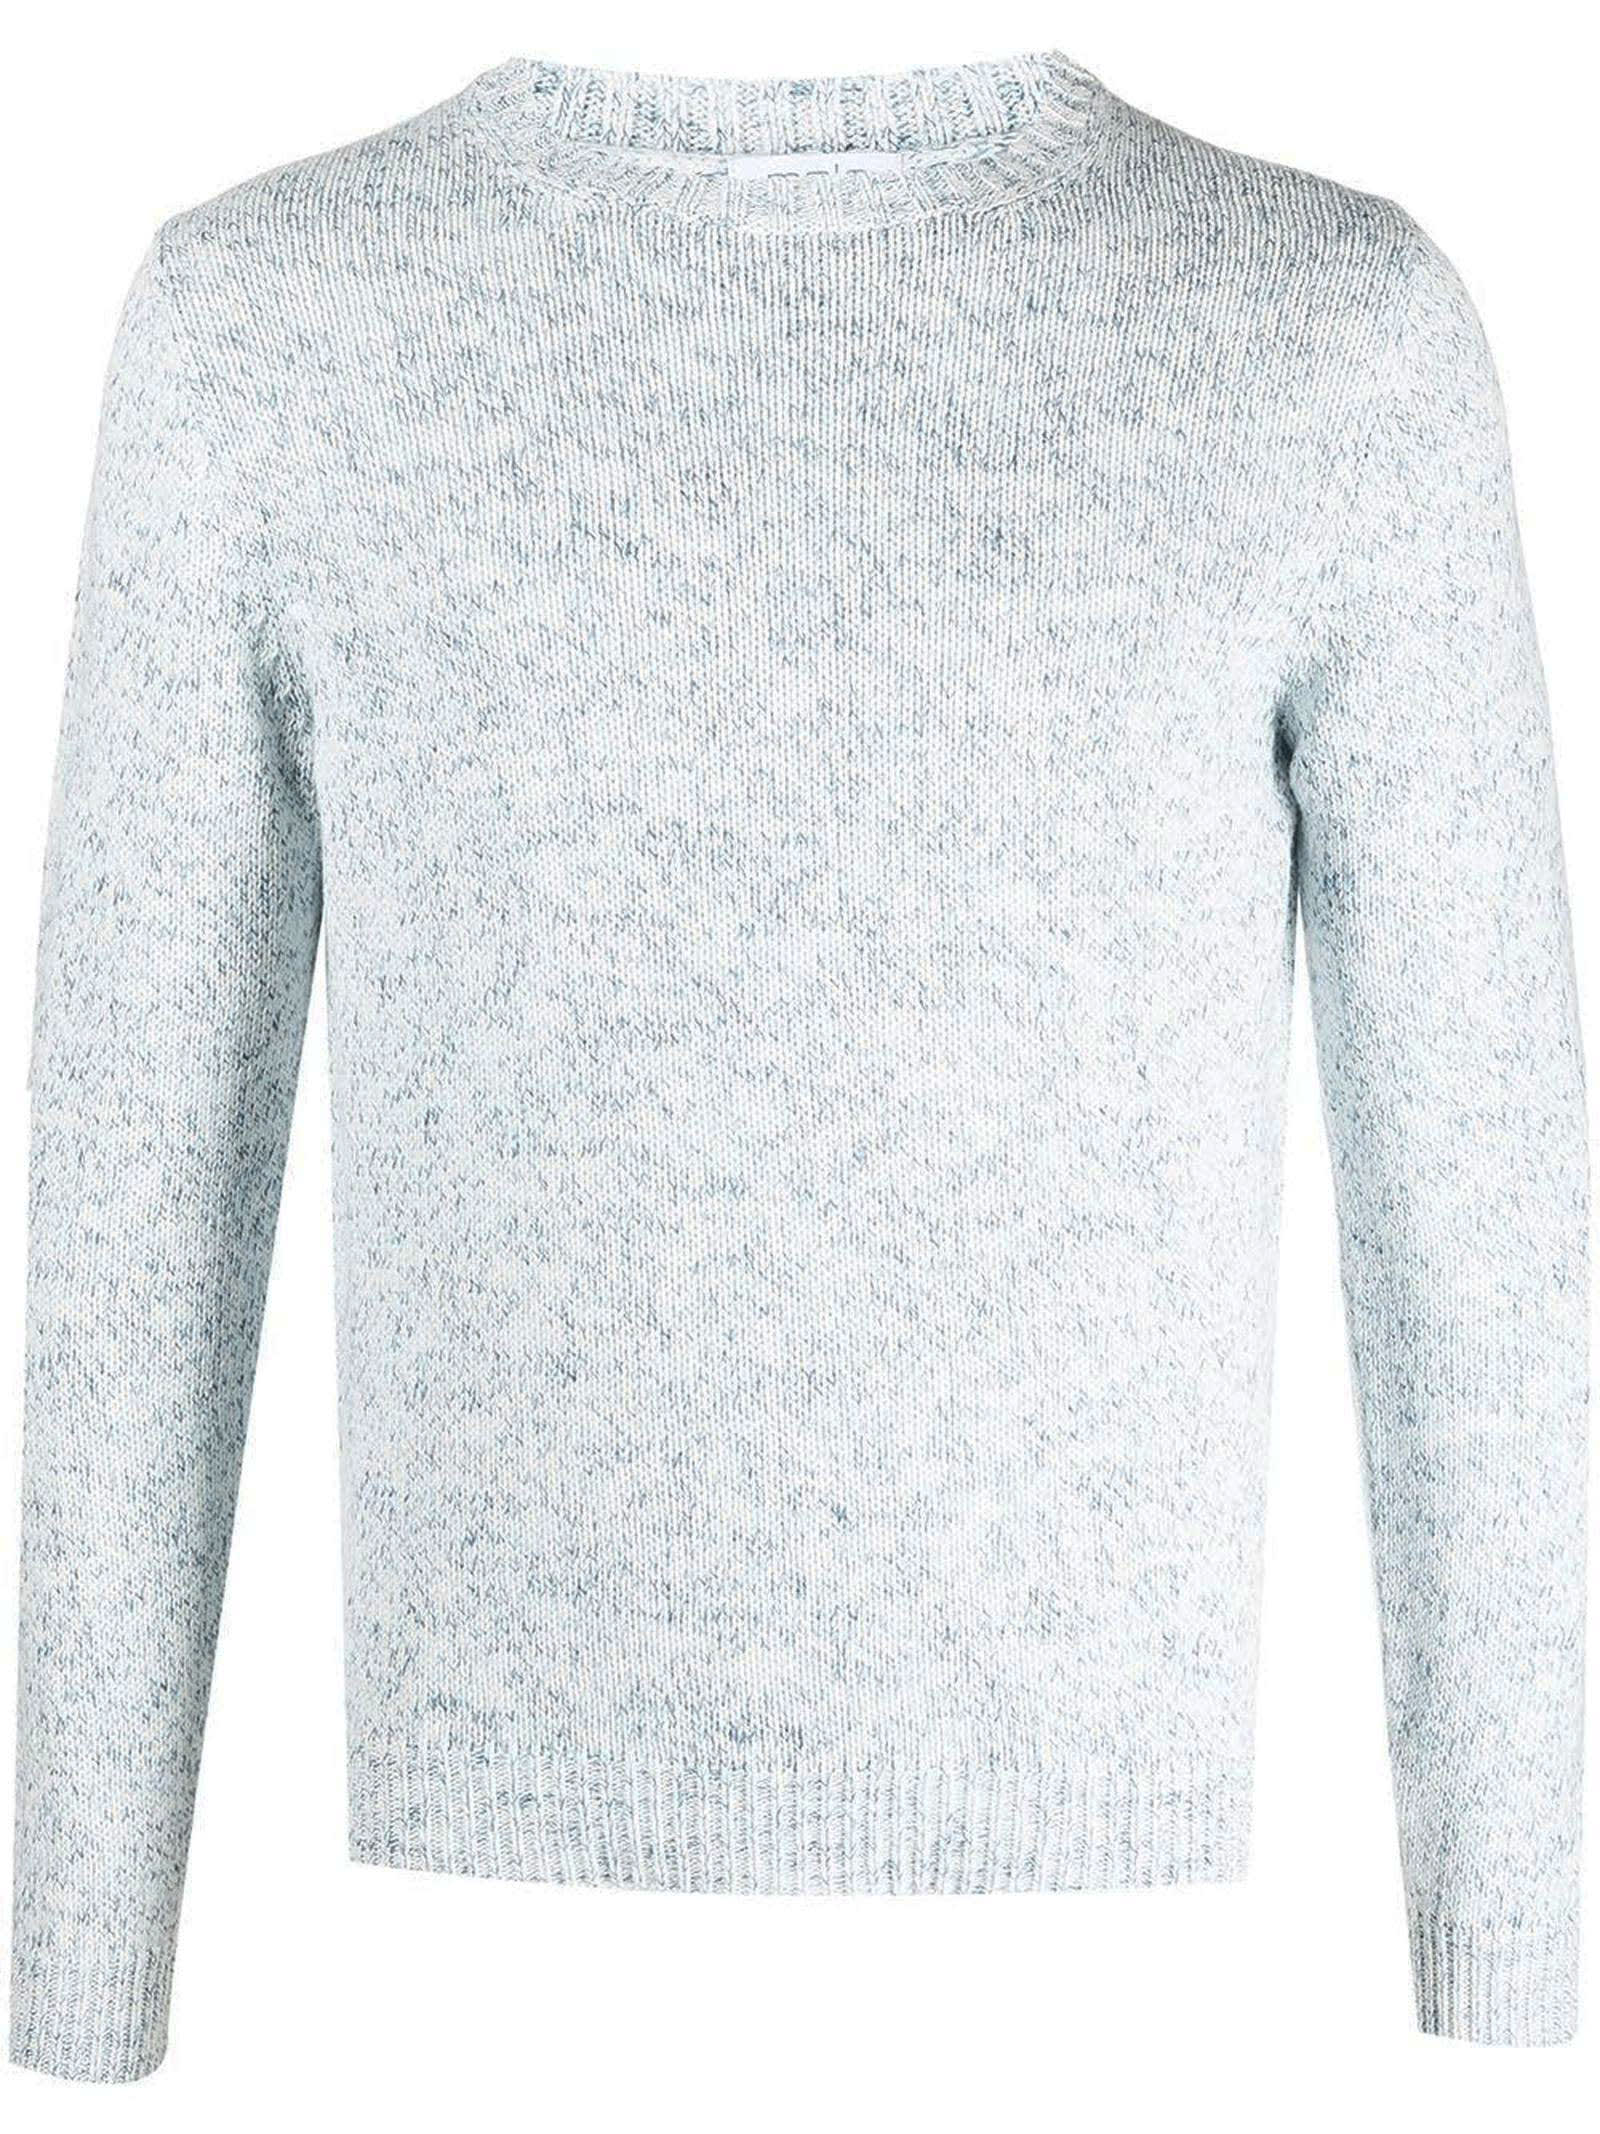 Malo Cashmere, Cotton And Silk Blend Sweater